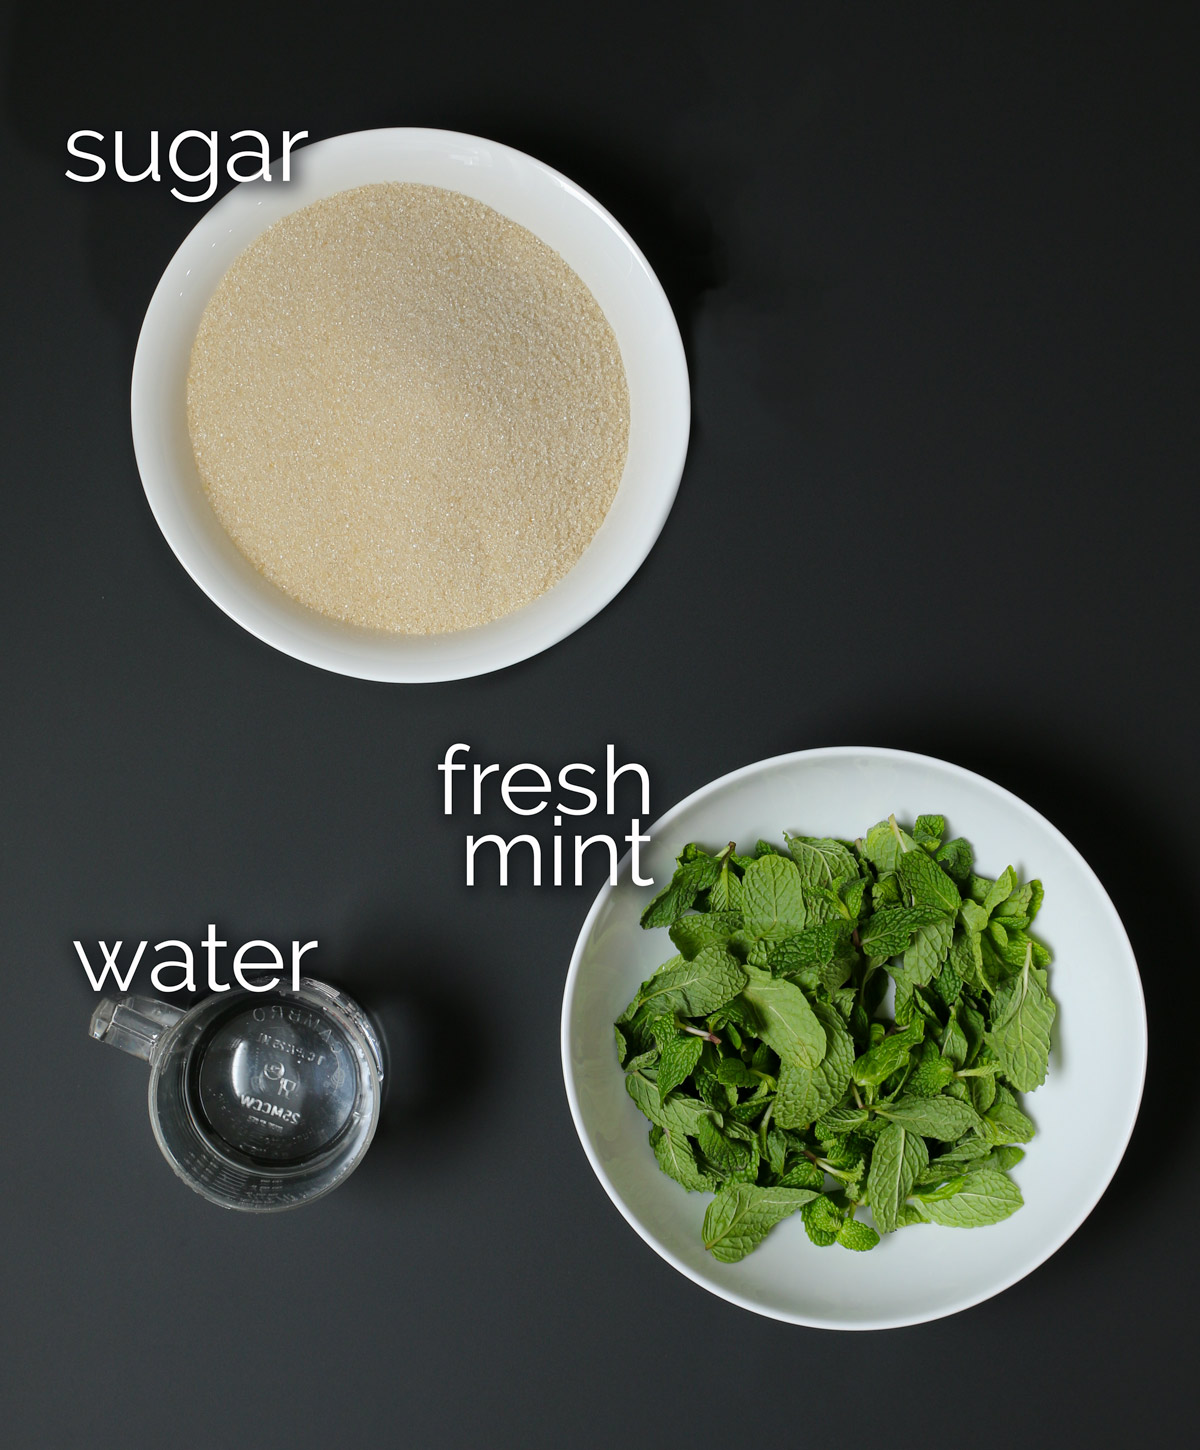 bowl of sugar next to clear cup of water and bowl of mint leaves on a black table.